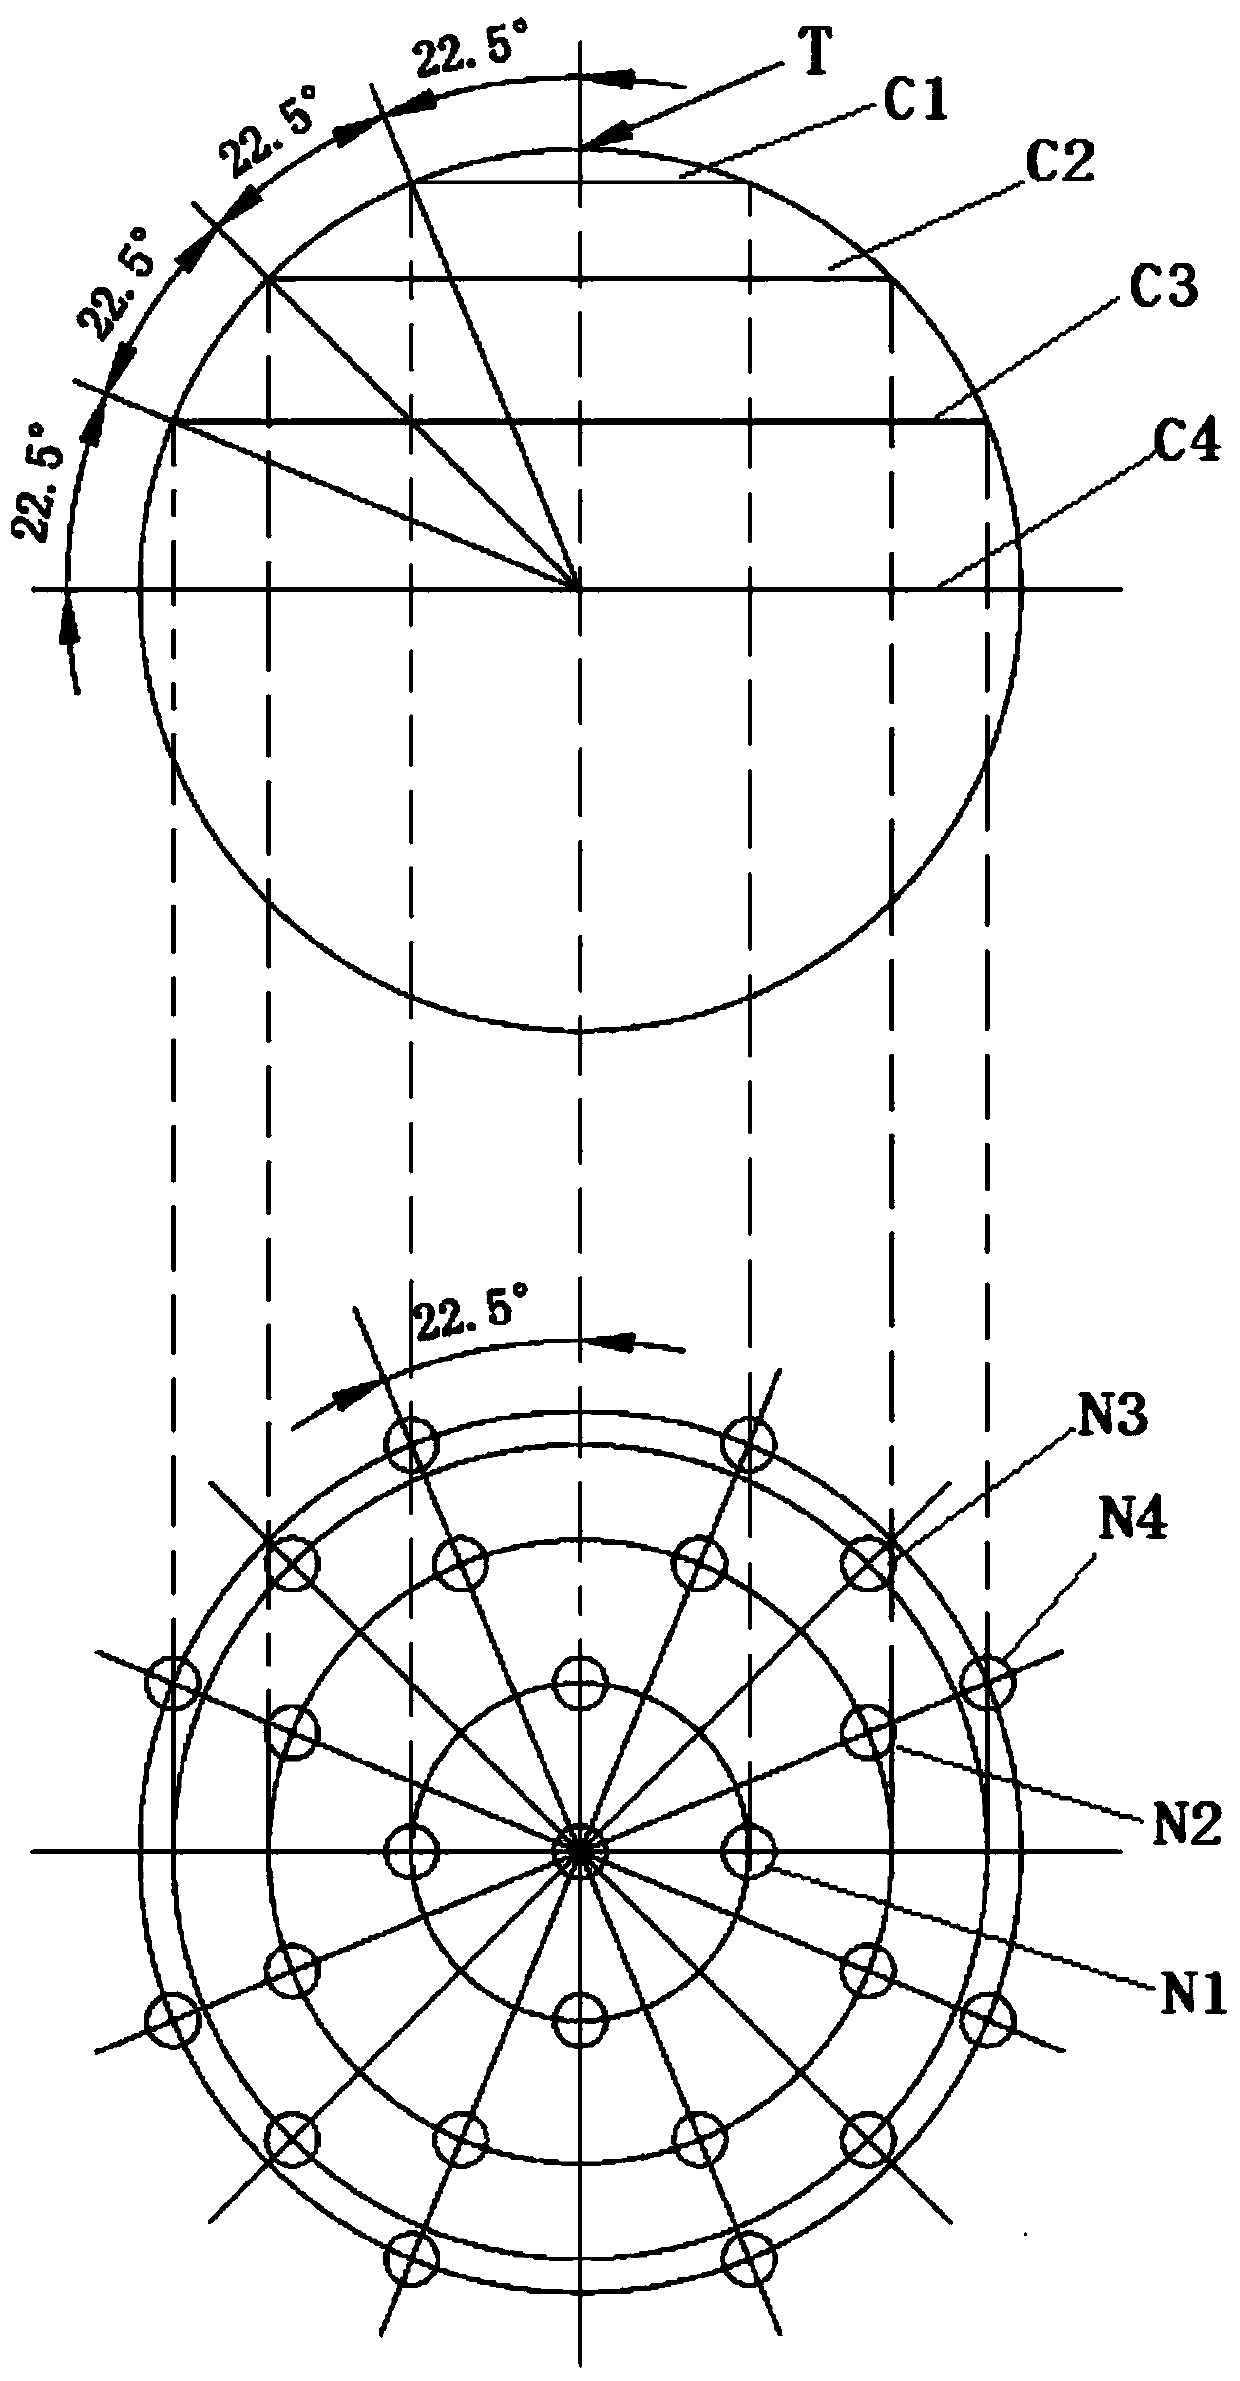 Machining method of supercharger impeller blade based on on-machine measurement